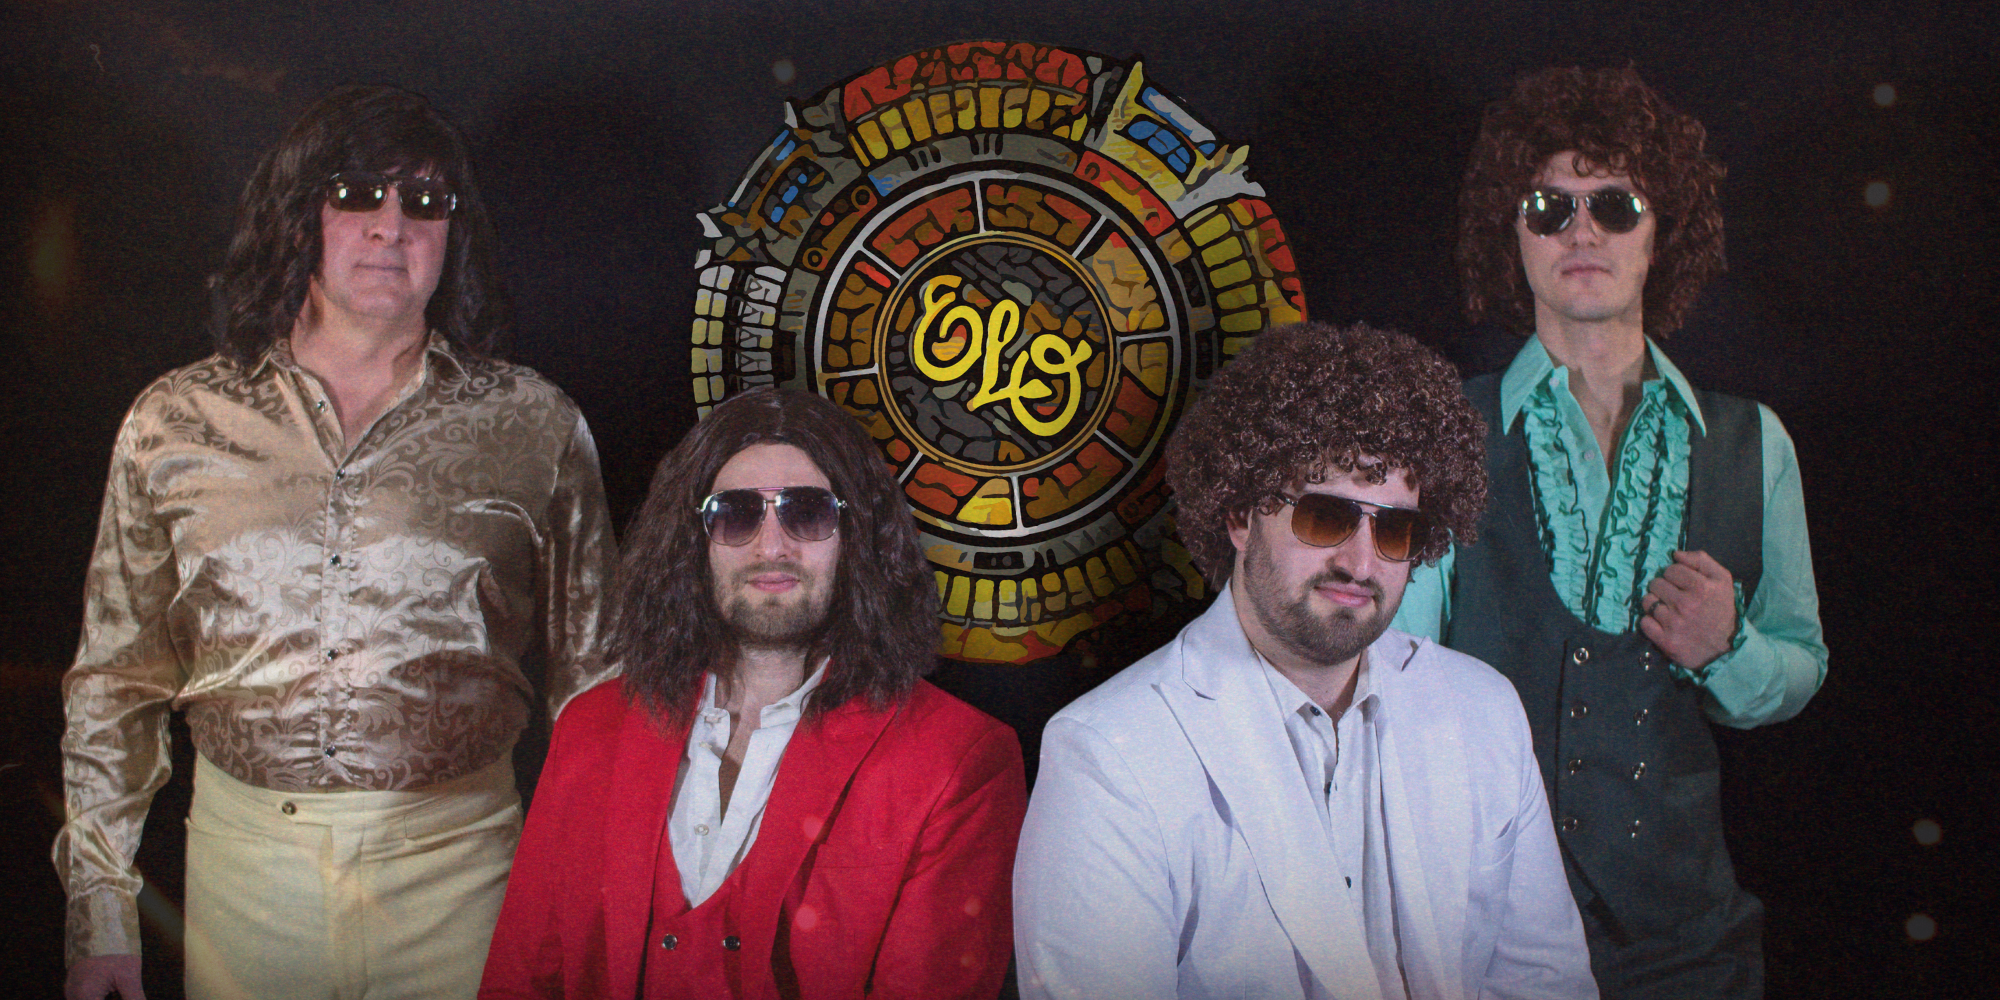 Photographic image of the musicians of Turn to Stone: a Tribute to ELO